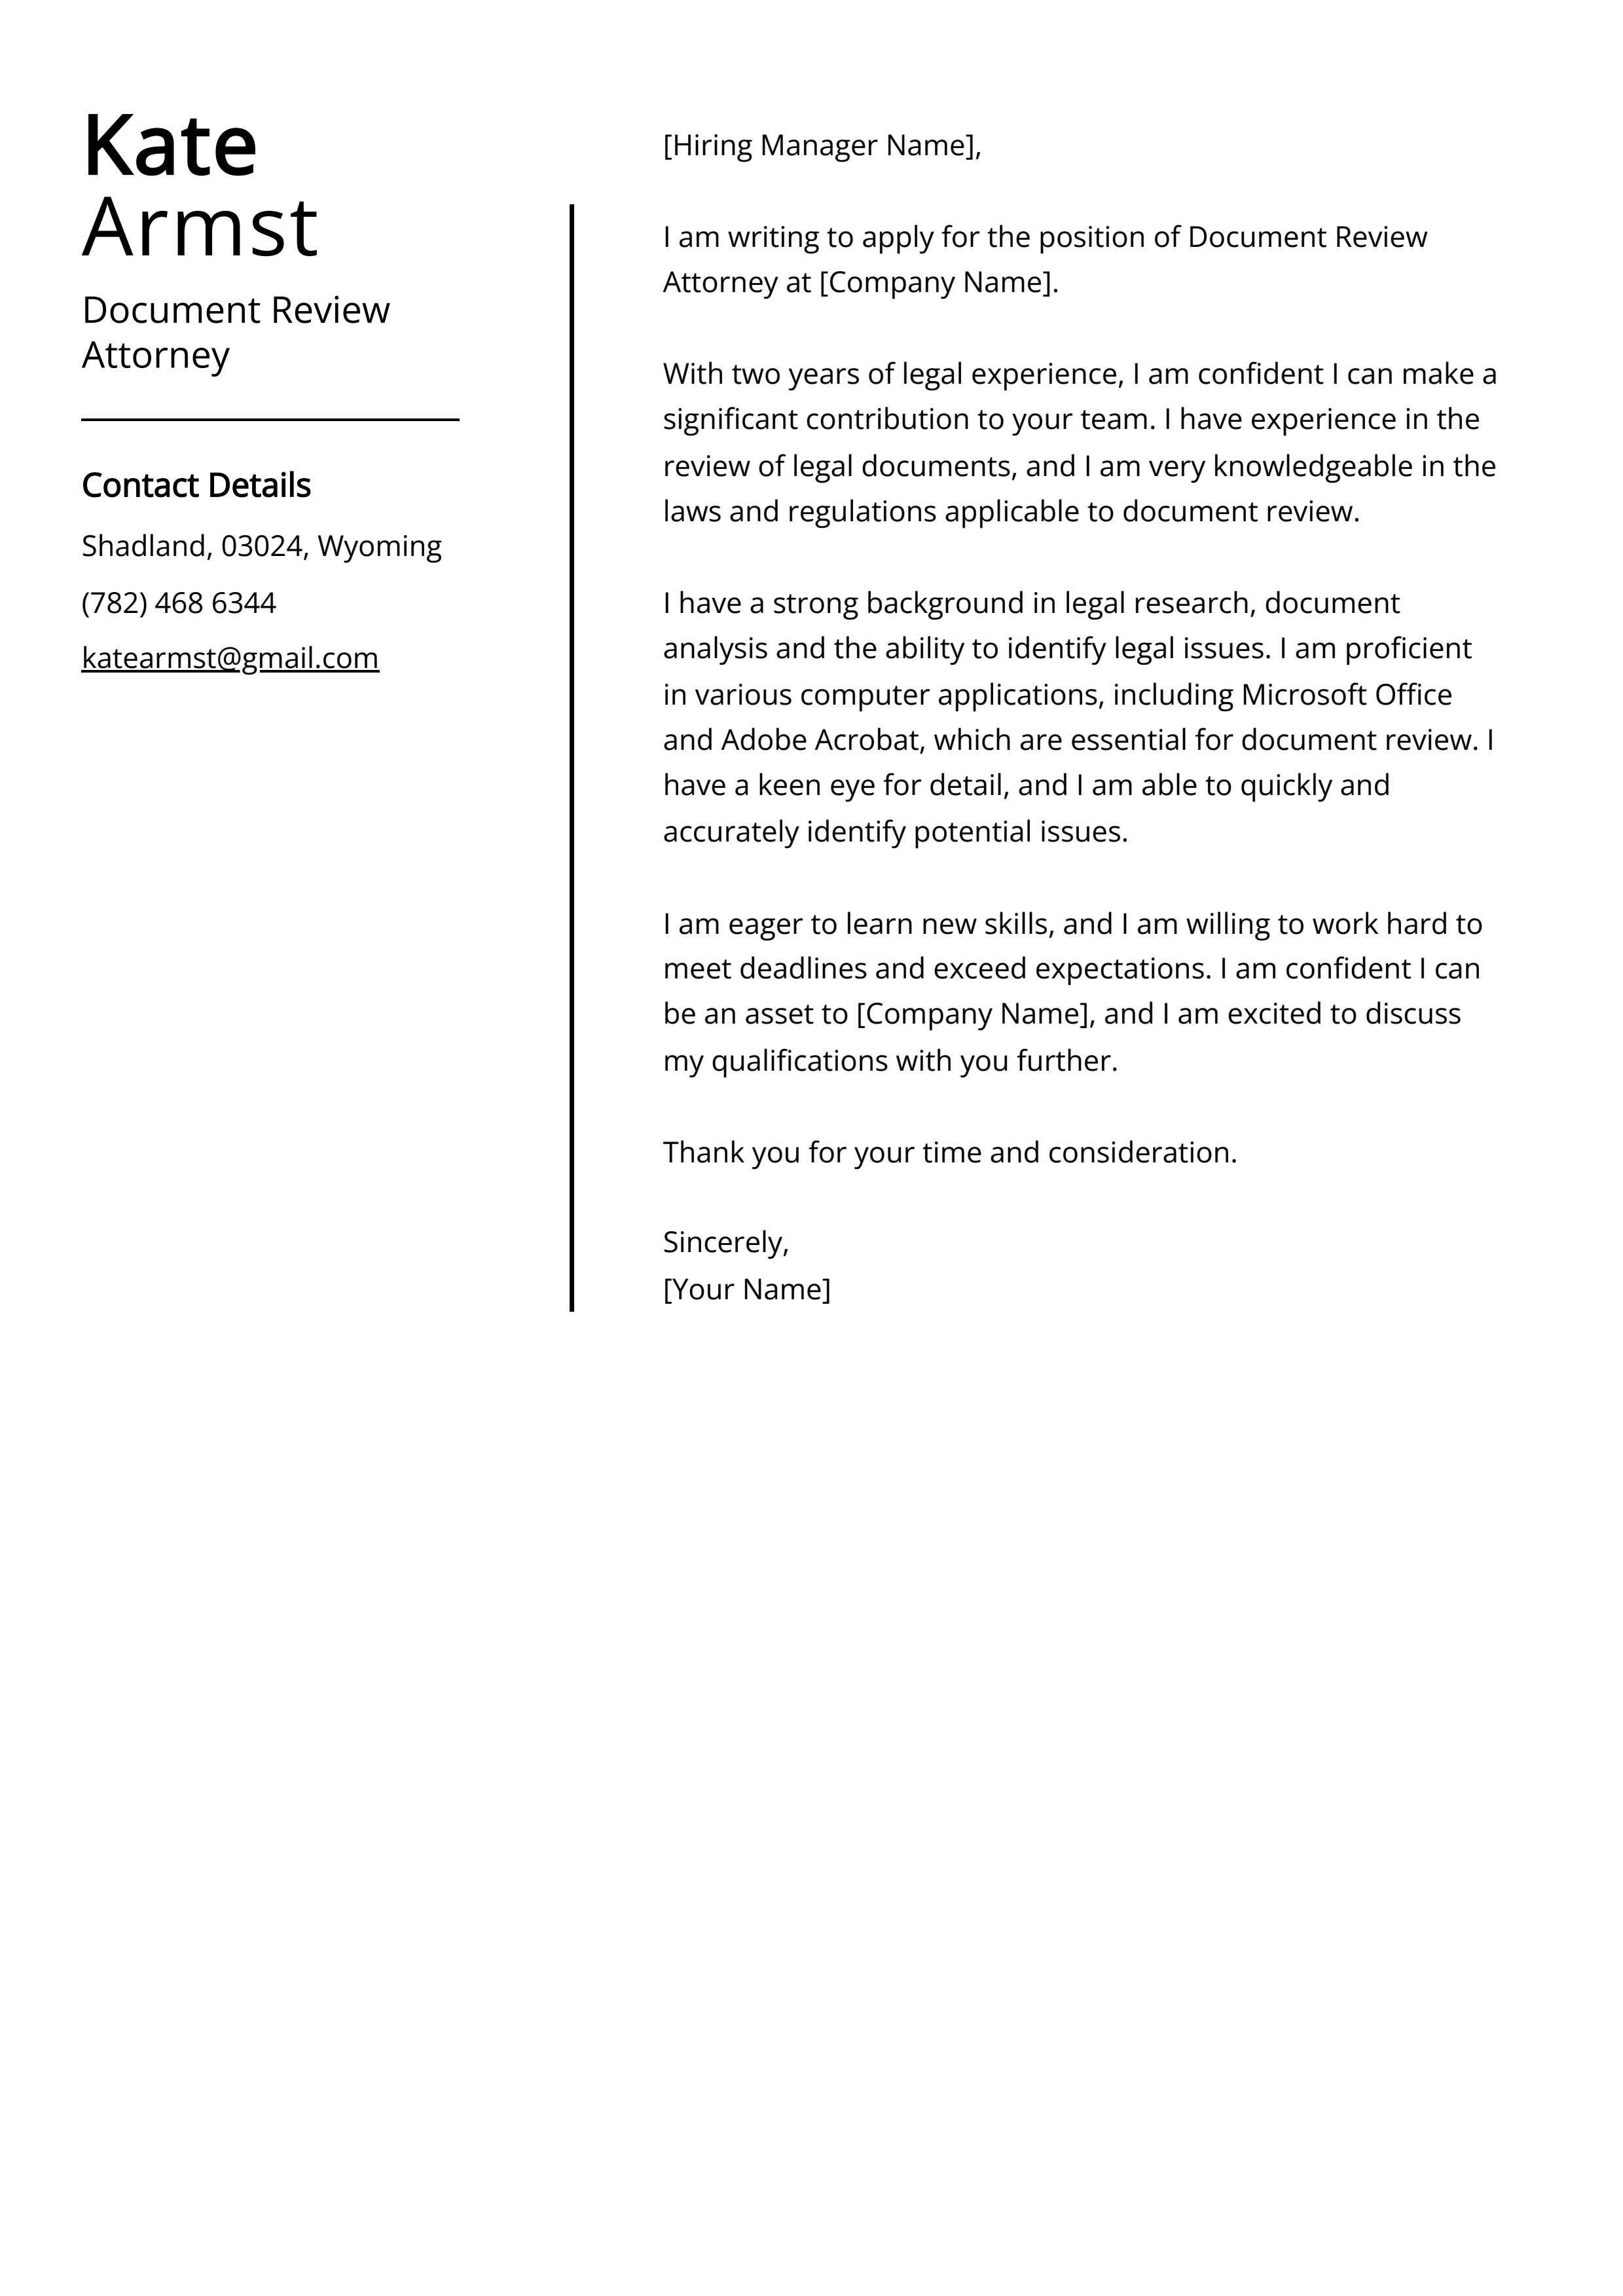 Document Review Attorney Cover Letter Example